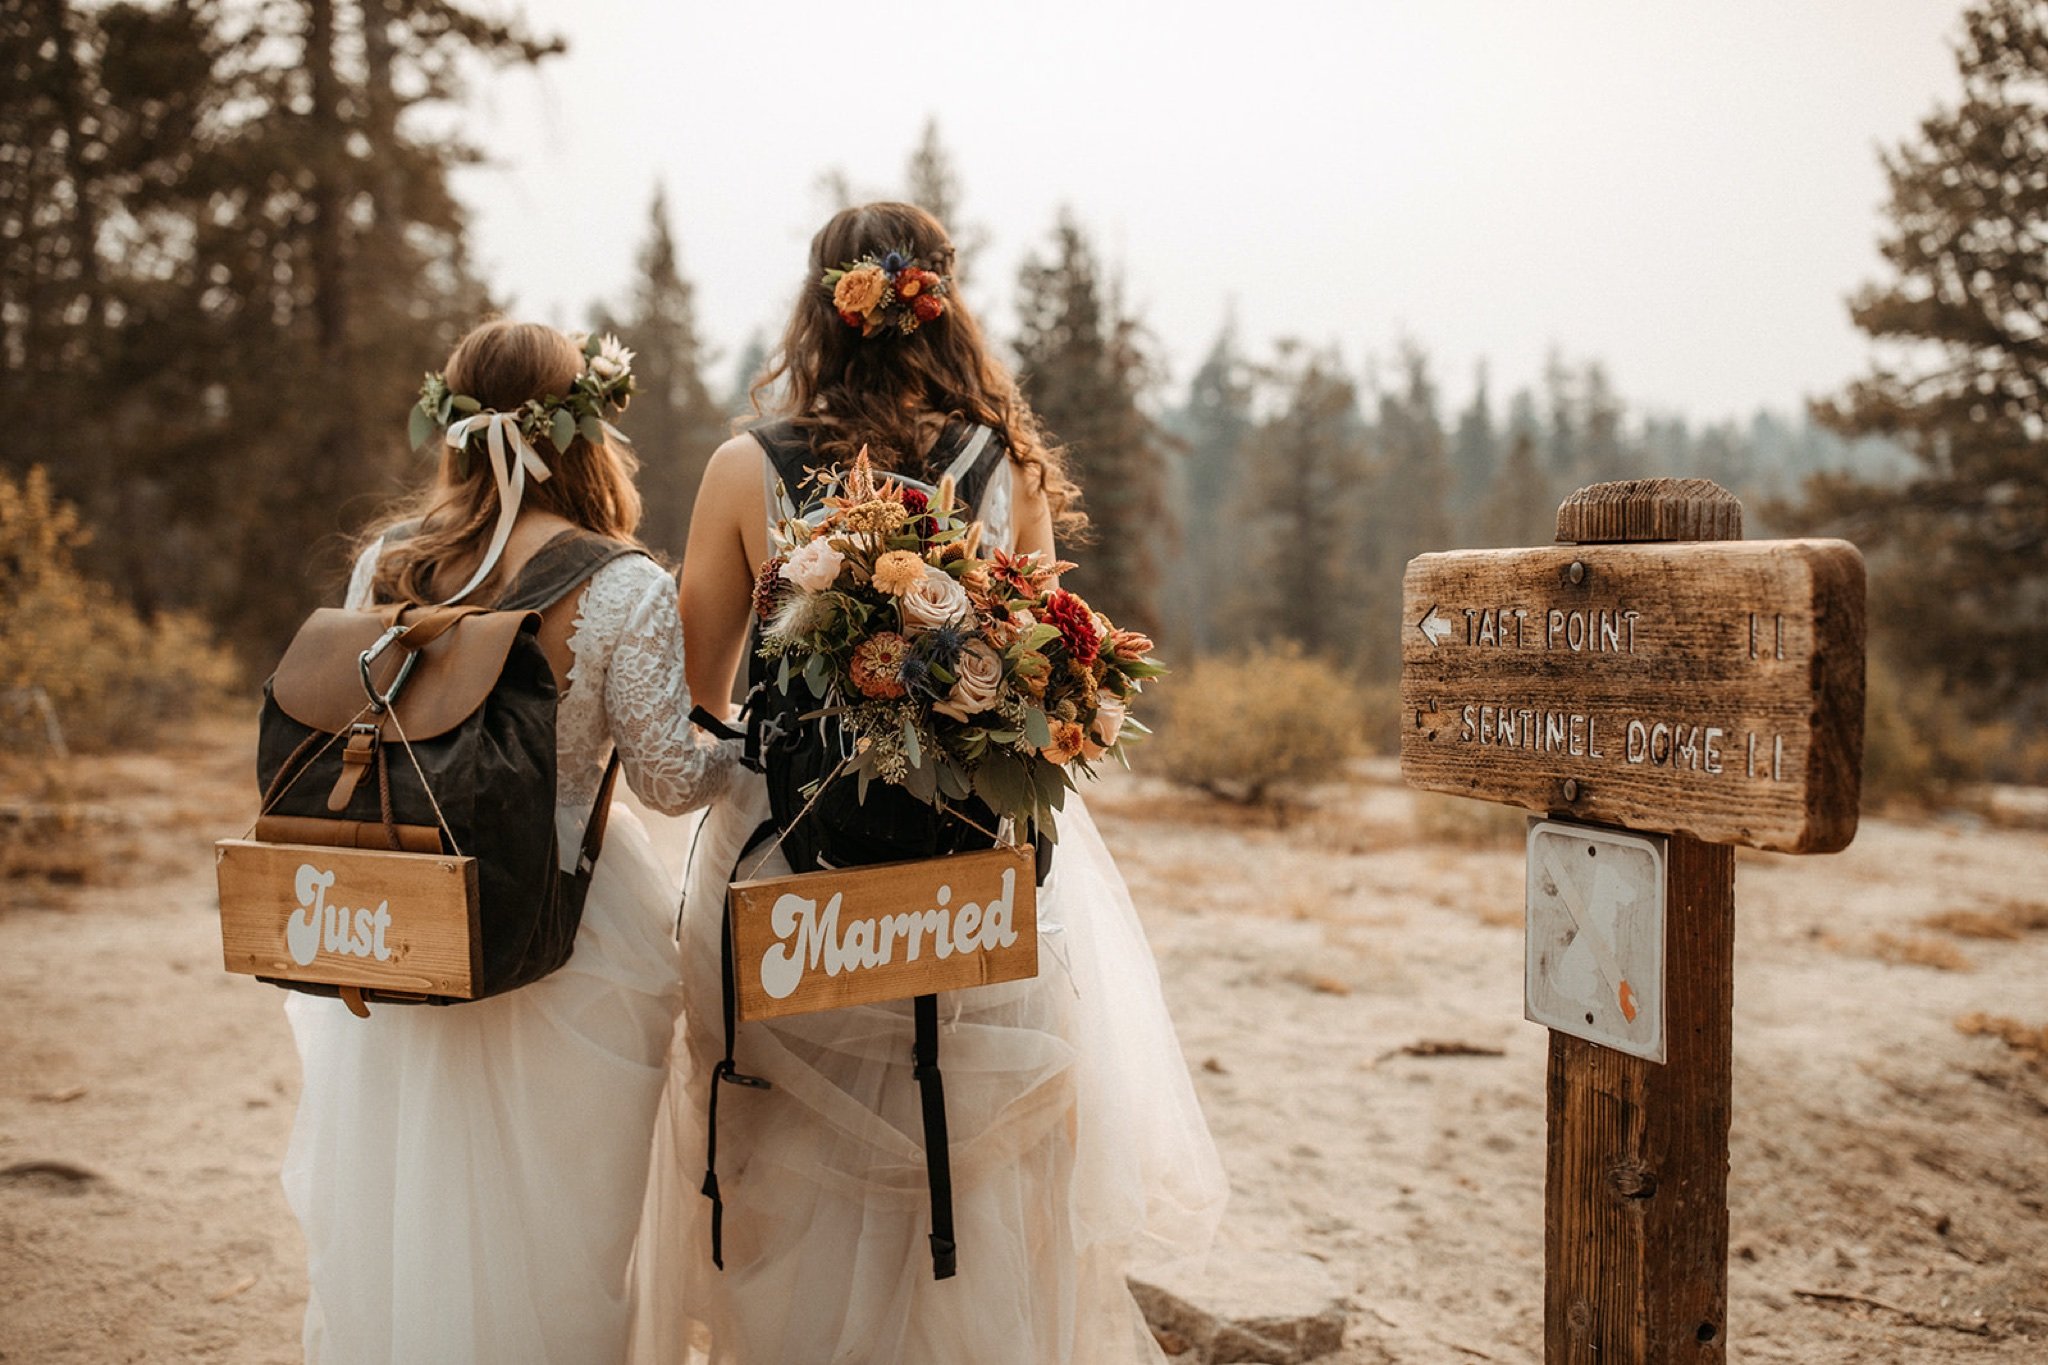 Yosemite National Park Elopement with Two Brides-Will Khoury27.jpg